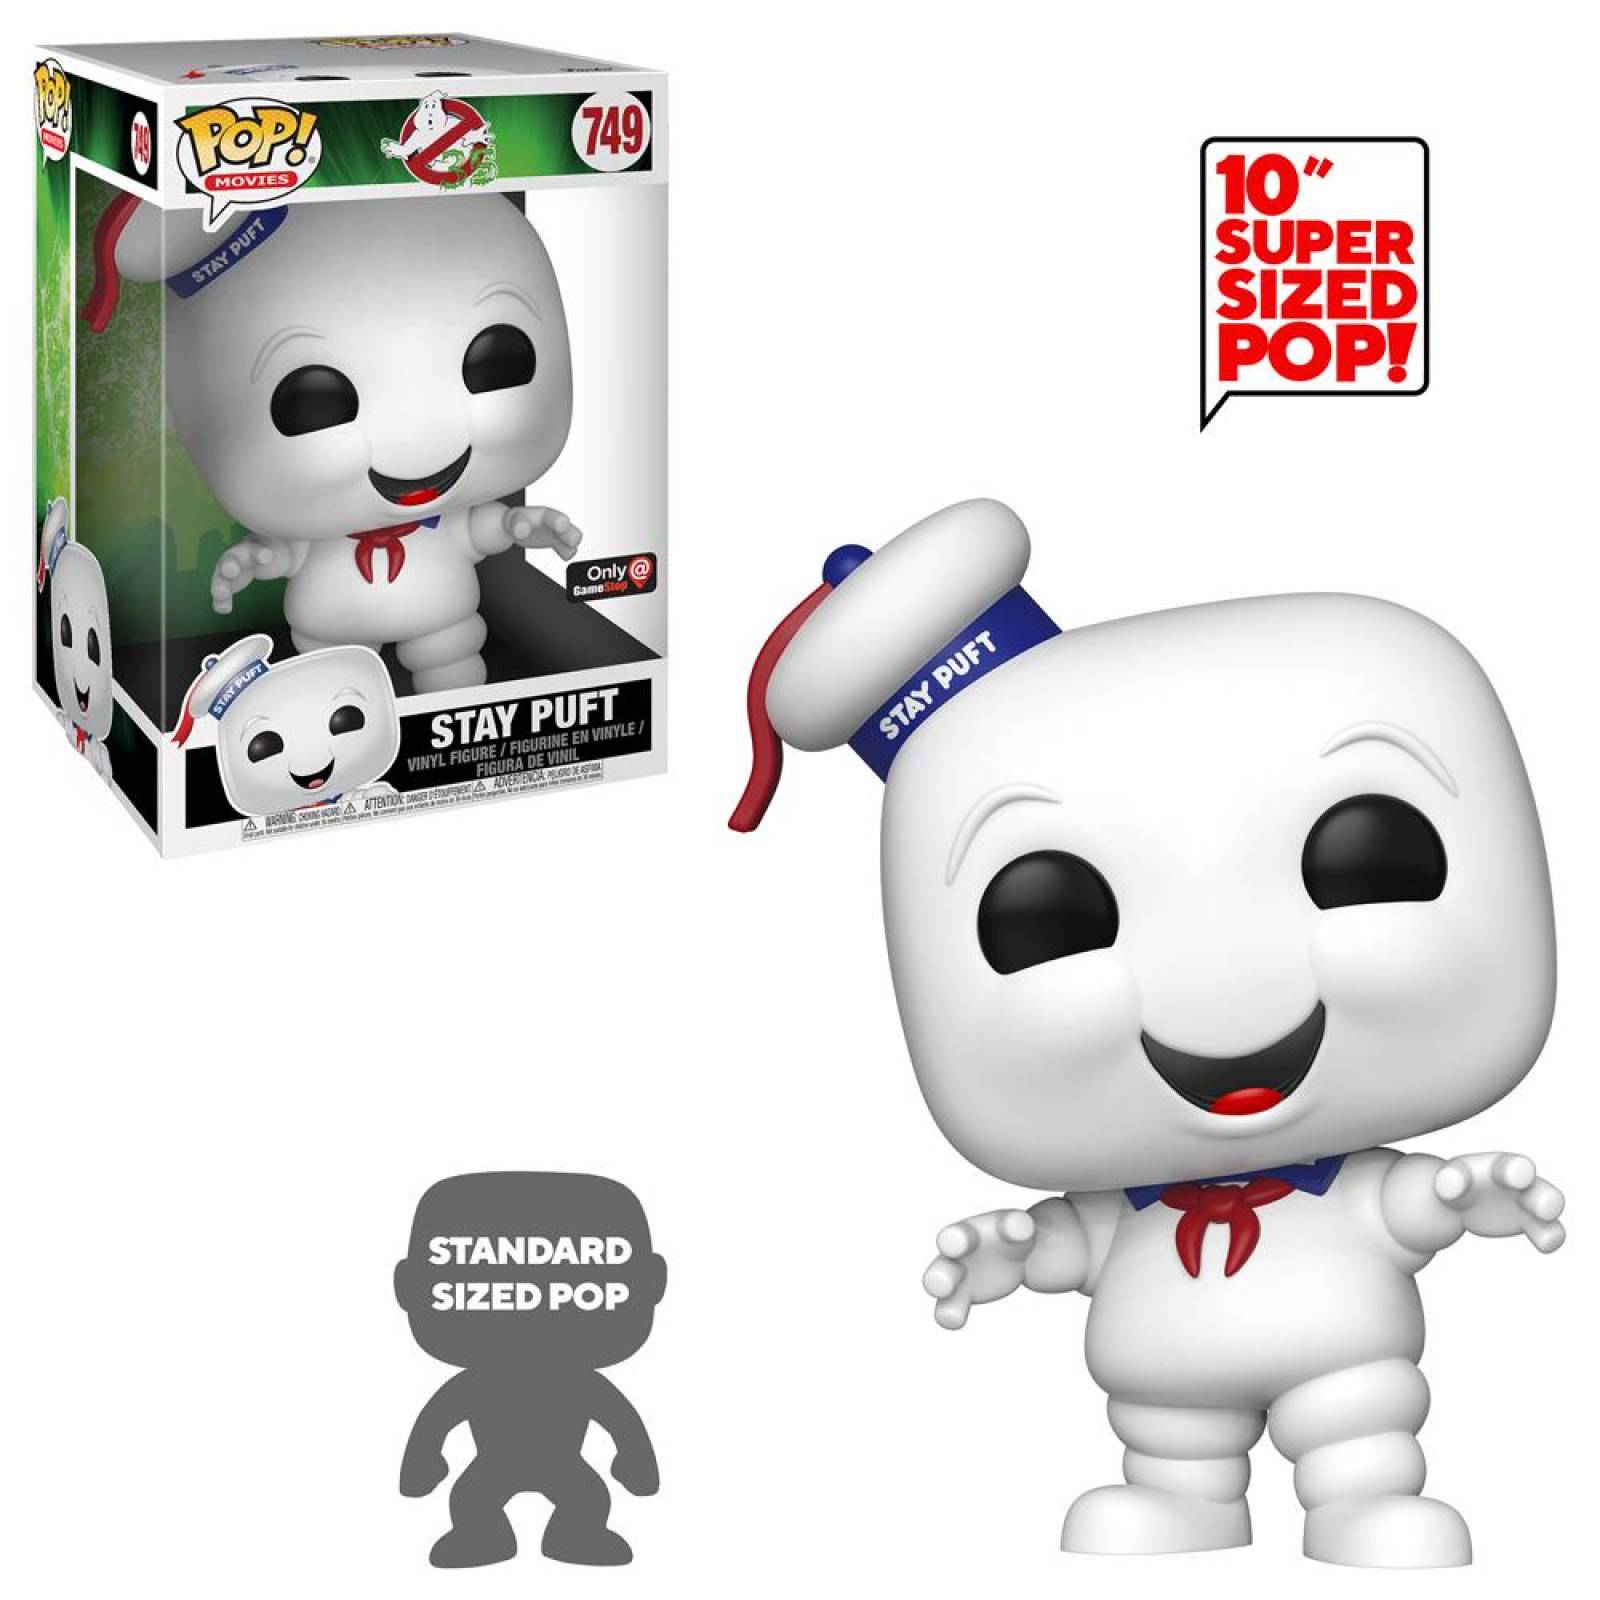 Stay Puff Funko Pop Ghostbusters Exclusivo 